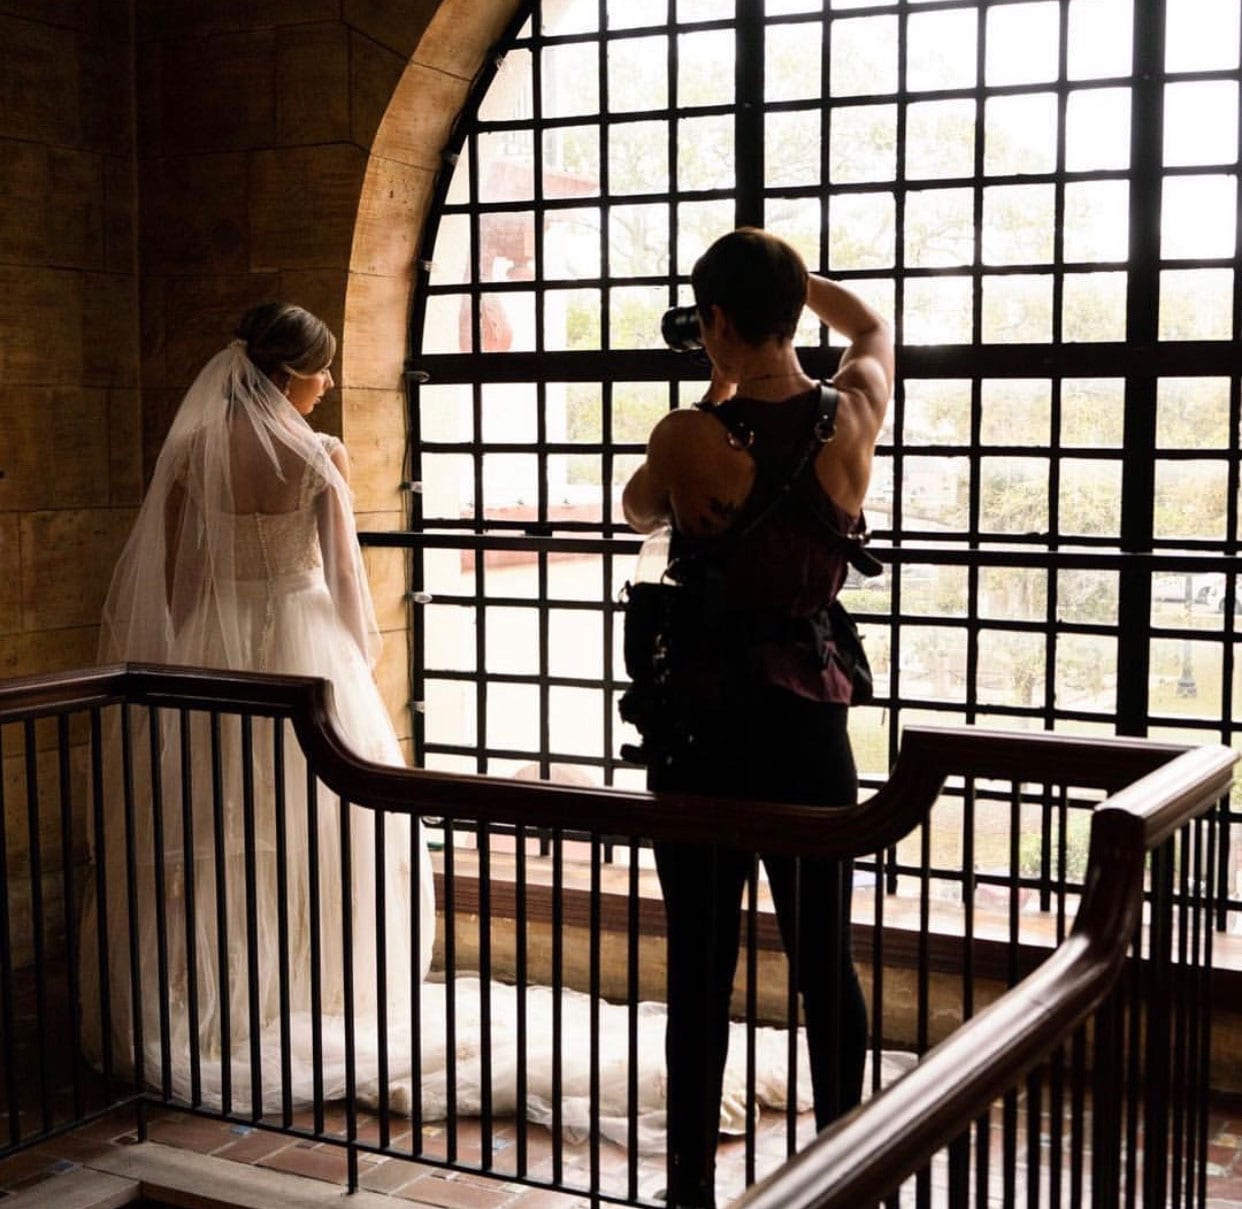 Share your Wedding Photos With Your Wedding Venue